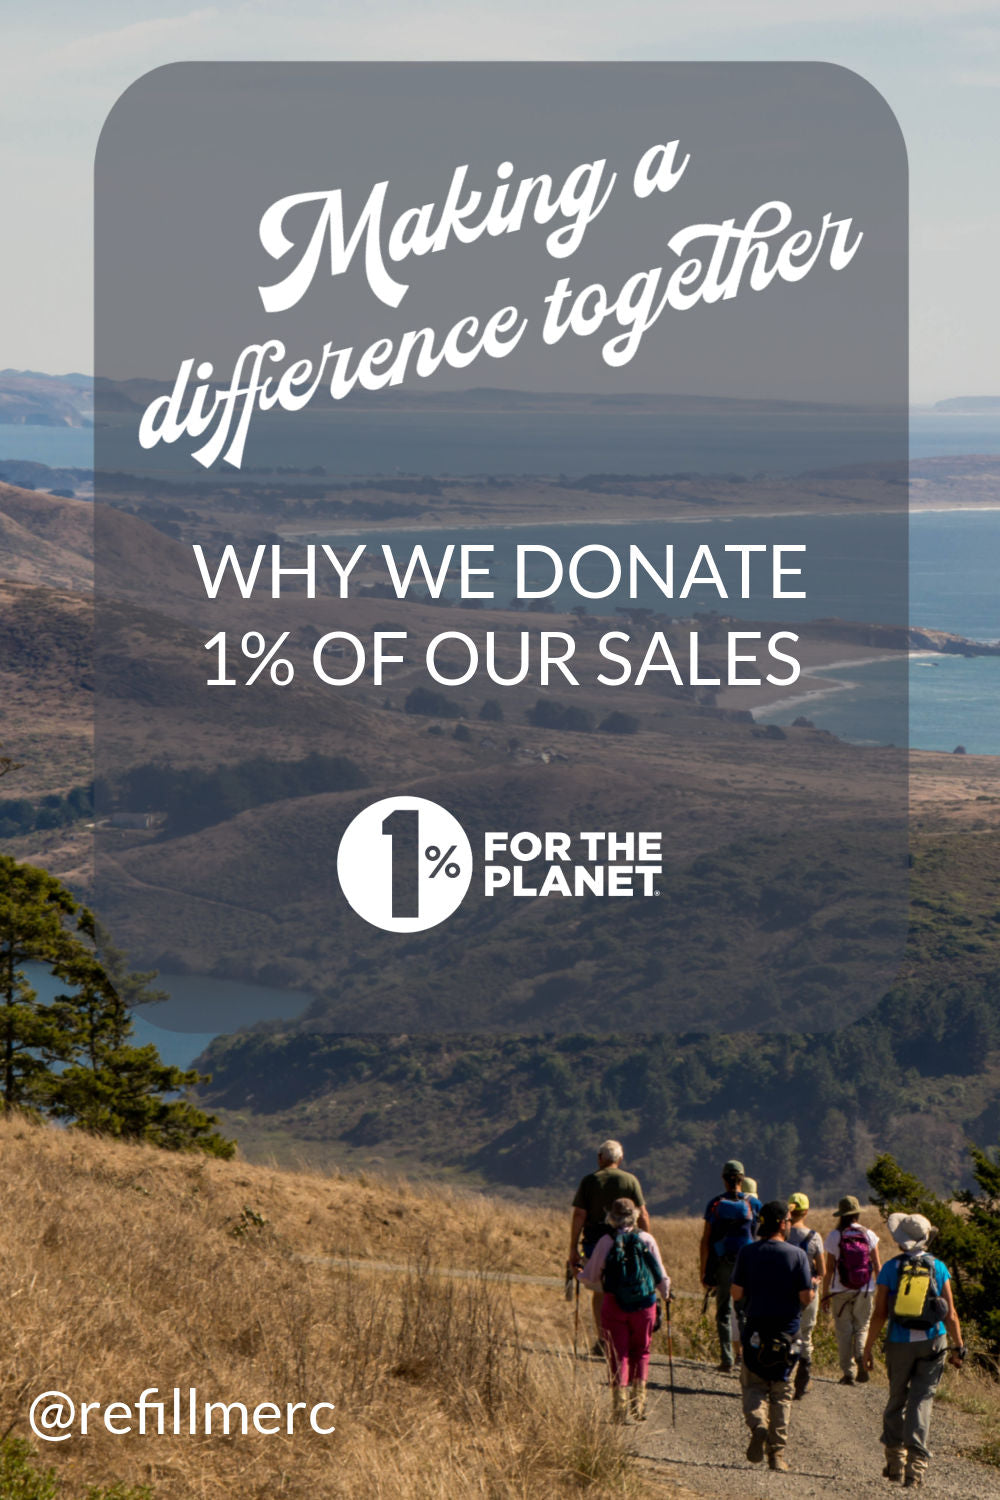 Making a Difference Together: Why We Donate 1% of Our Sales